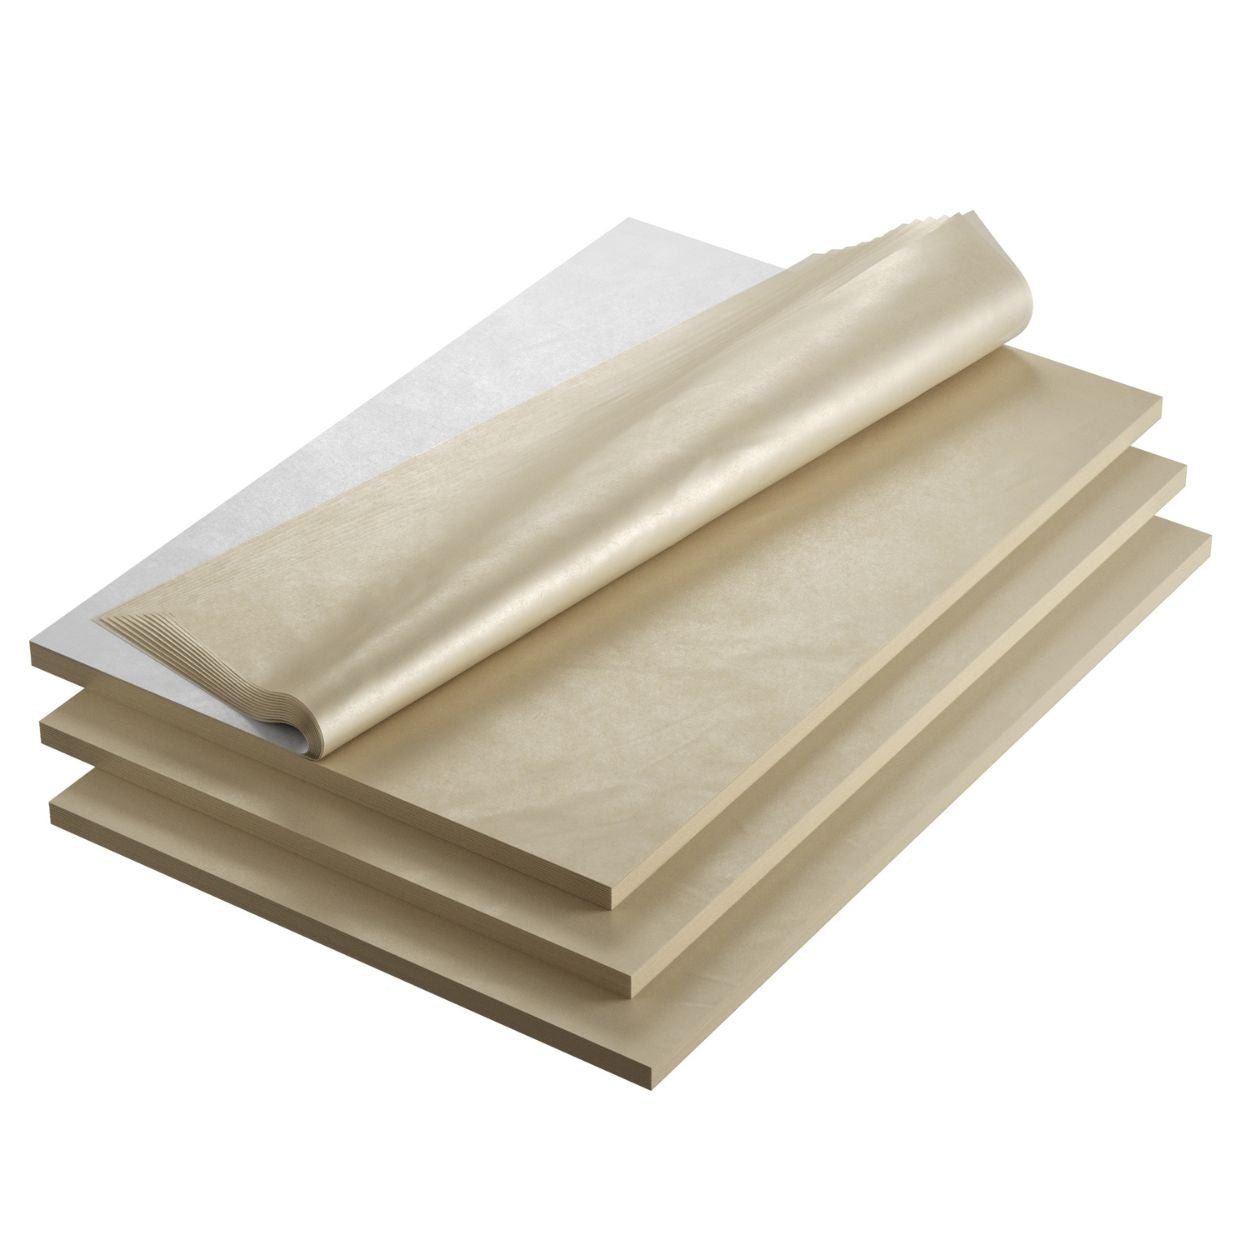 BABCOR Packaging: Boysenberry Satinwrap Solid Tissue - 20 x 30 in.